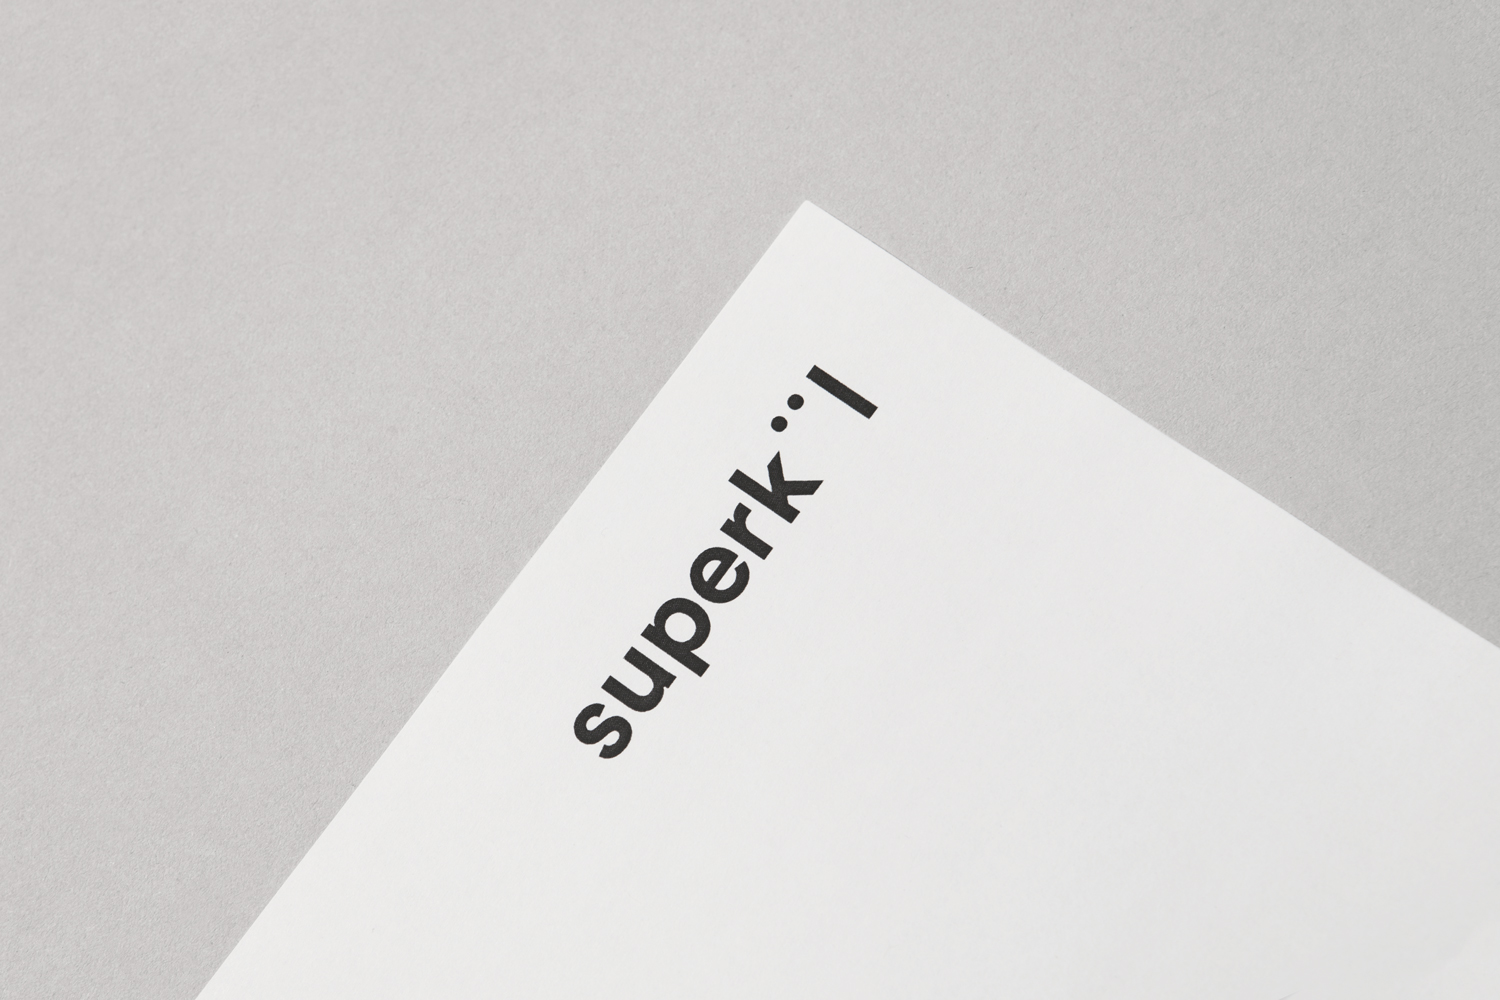 Brand identity and headed paper by Toronto-based graphic design studio Blok for Canadian architecture firm Superkül